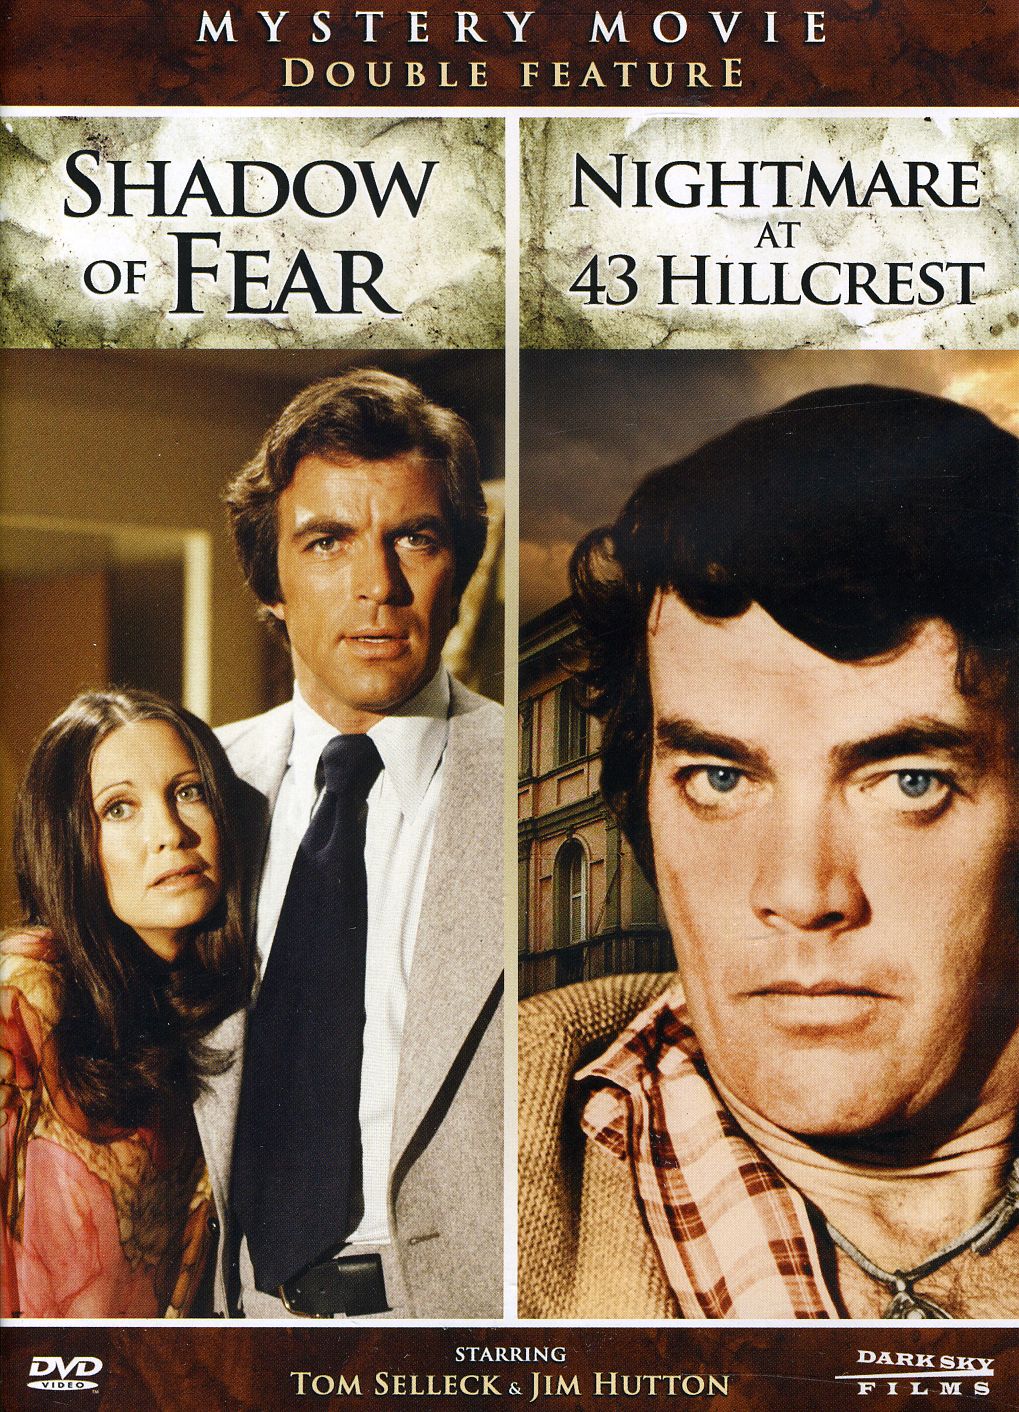 SHADOW OF FEAR & NIGHTMARE AT 43 HILLCREST